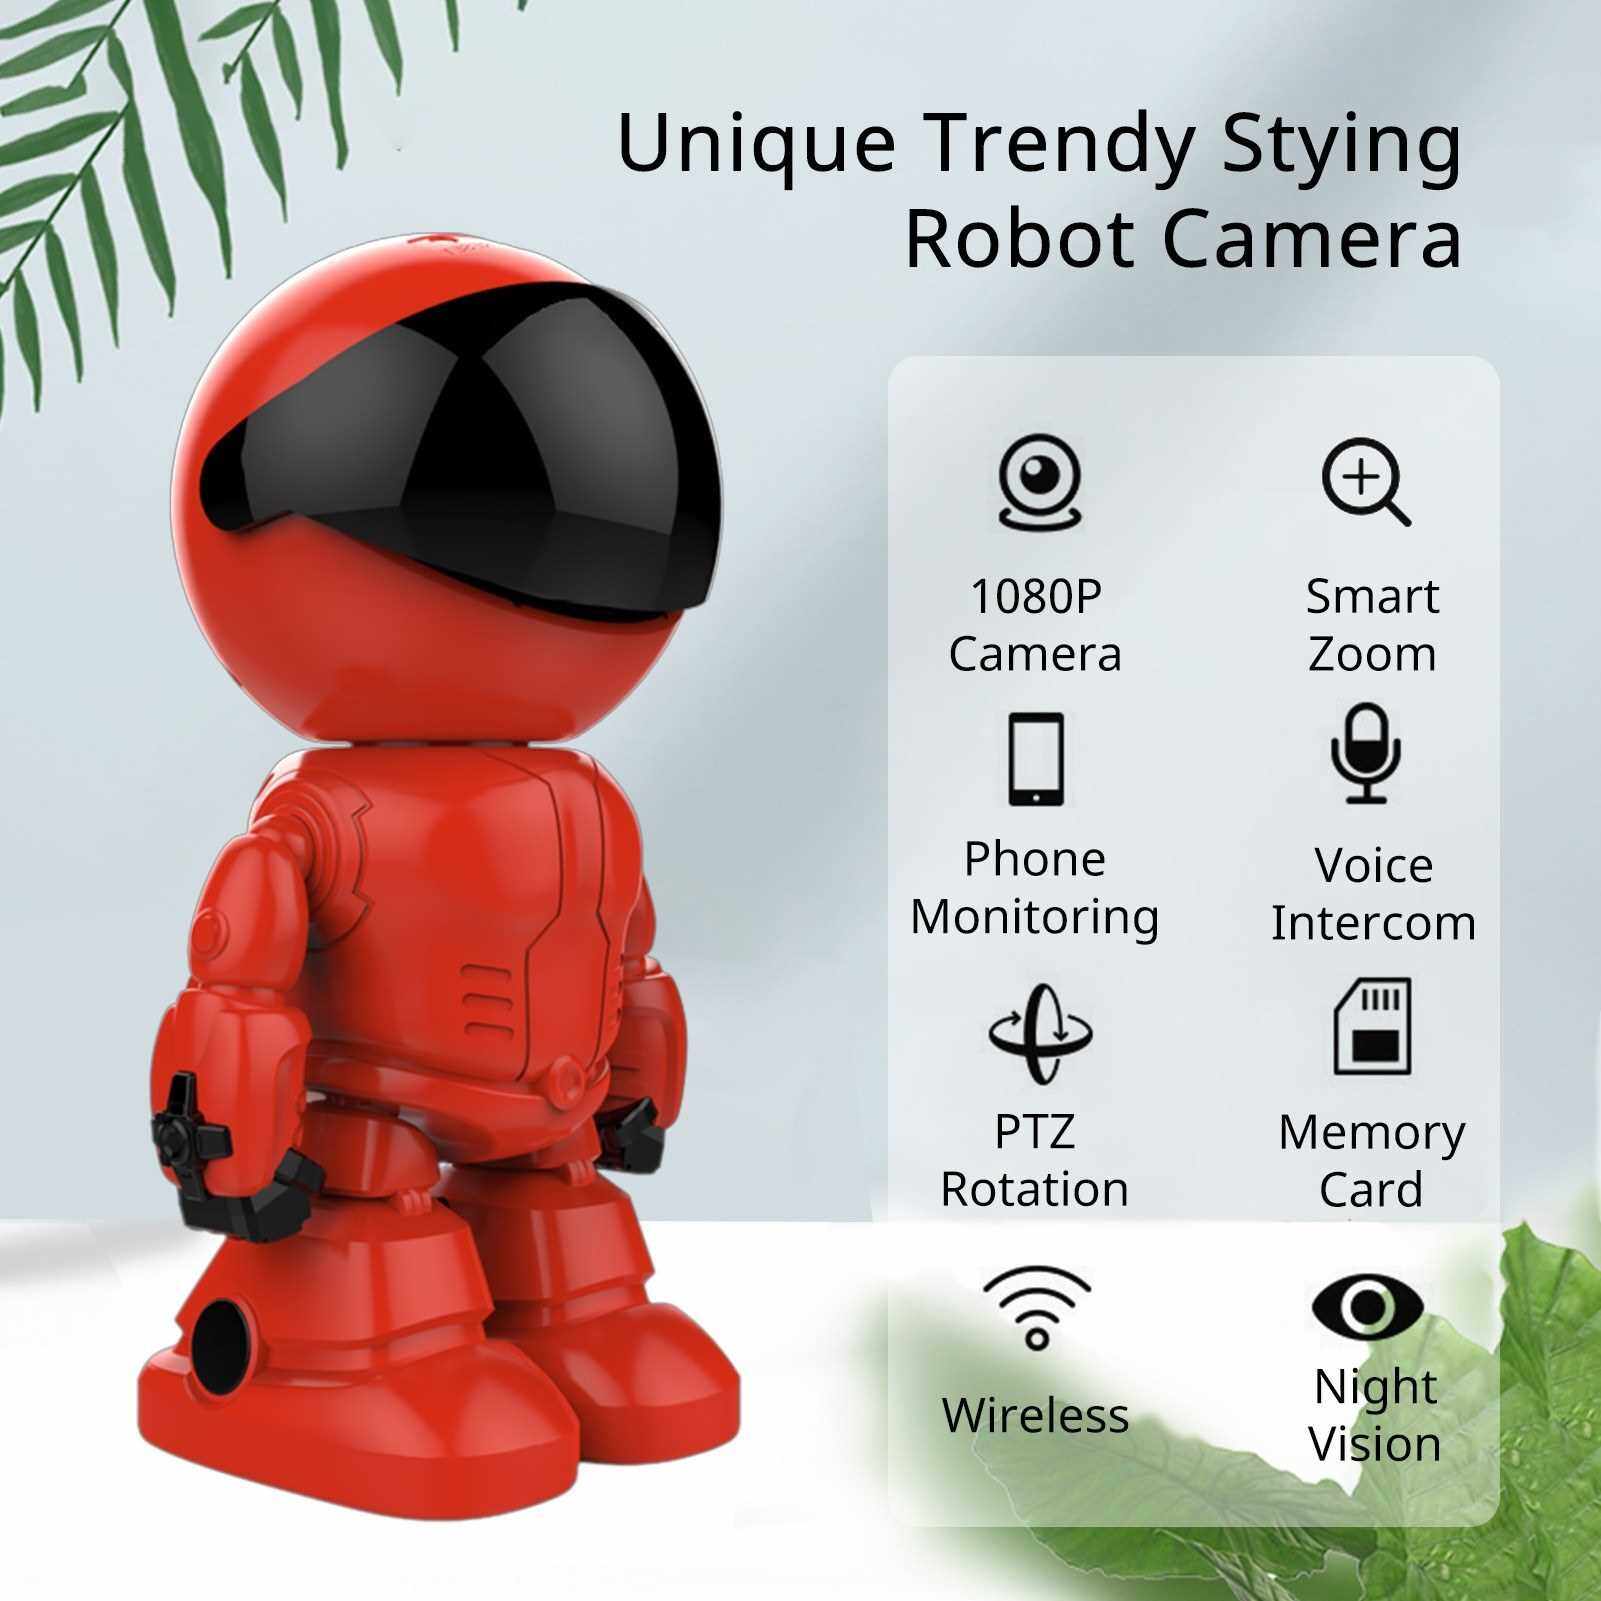 1080P Home Security Wireless Camera, Robot IP Camera WiFi Surveillance Camera Baby Monitor for Baby/Pet Support 360 view, Night Vision, 2-Way Audio, Motion Tracking, Yoosee App Remote Access, Red (Red)